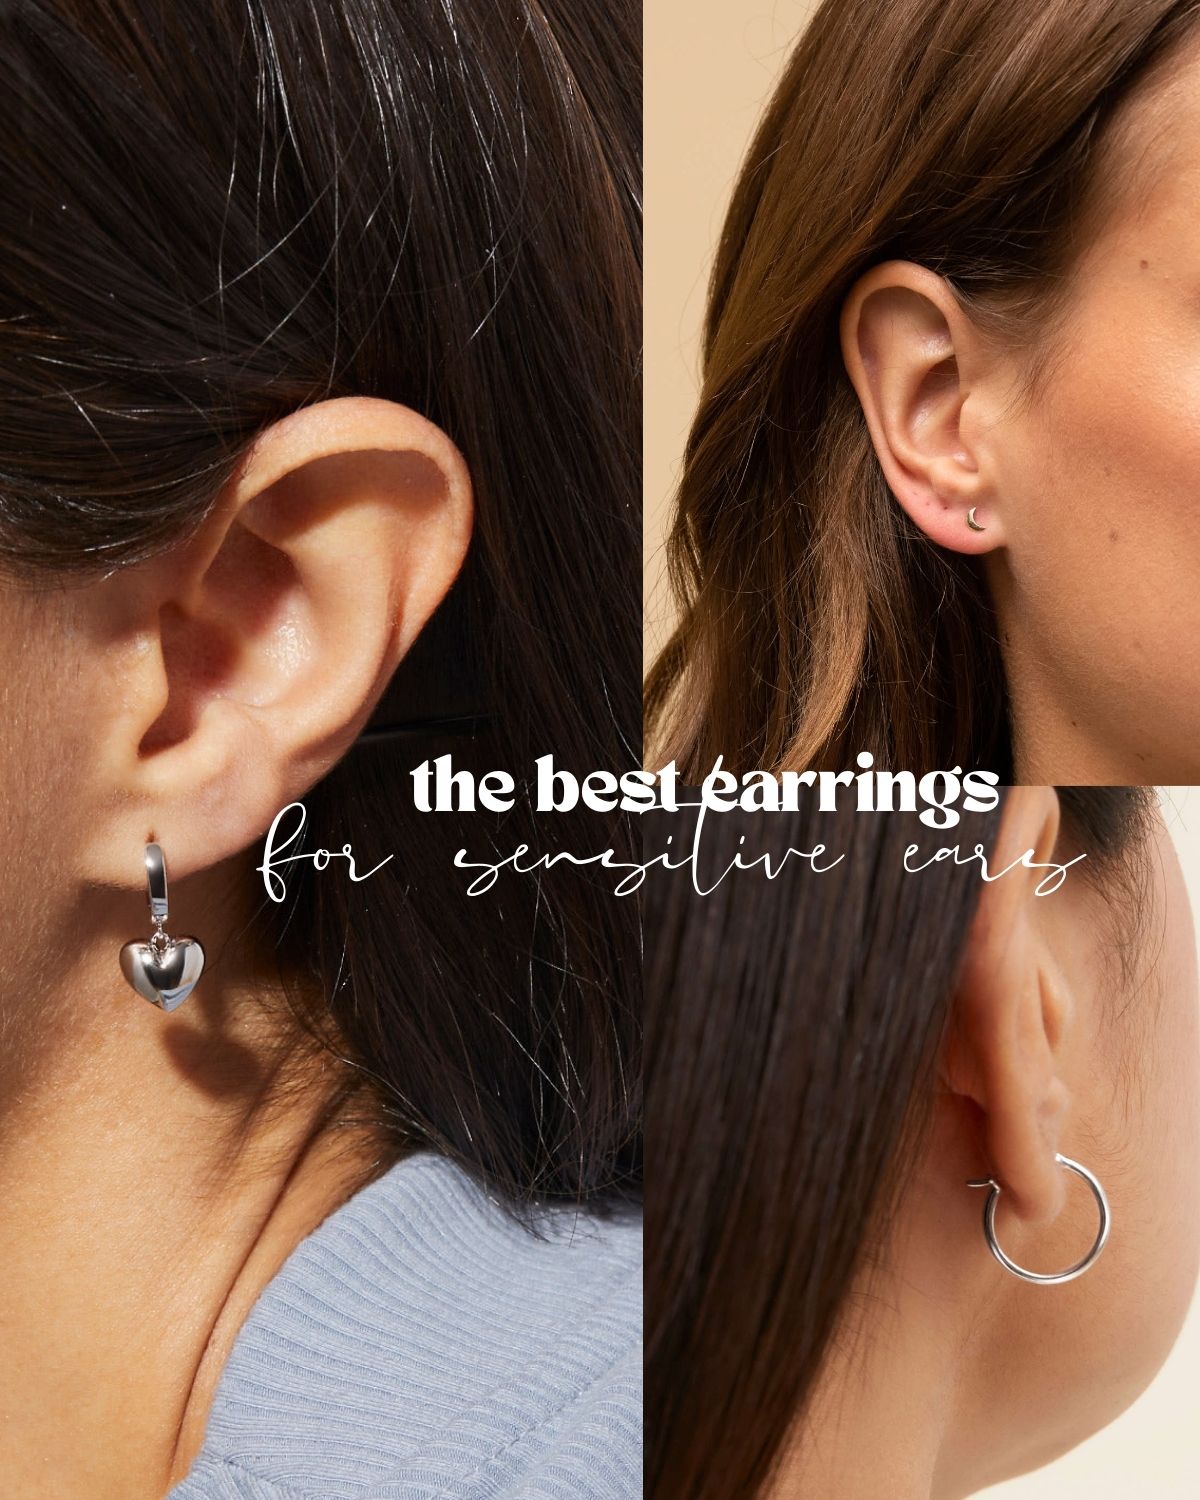 What are the best earrings for sensitive ears